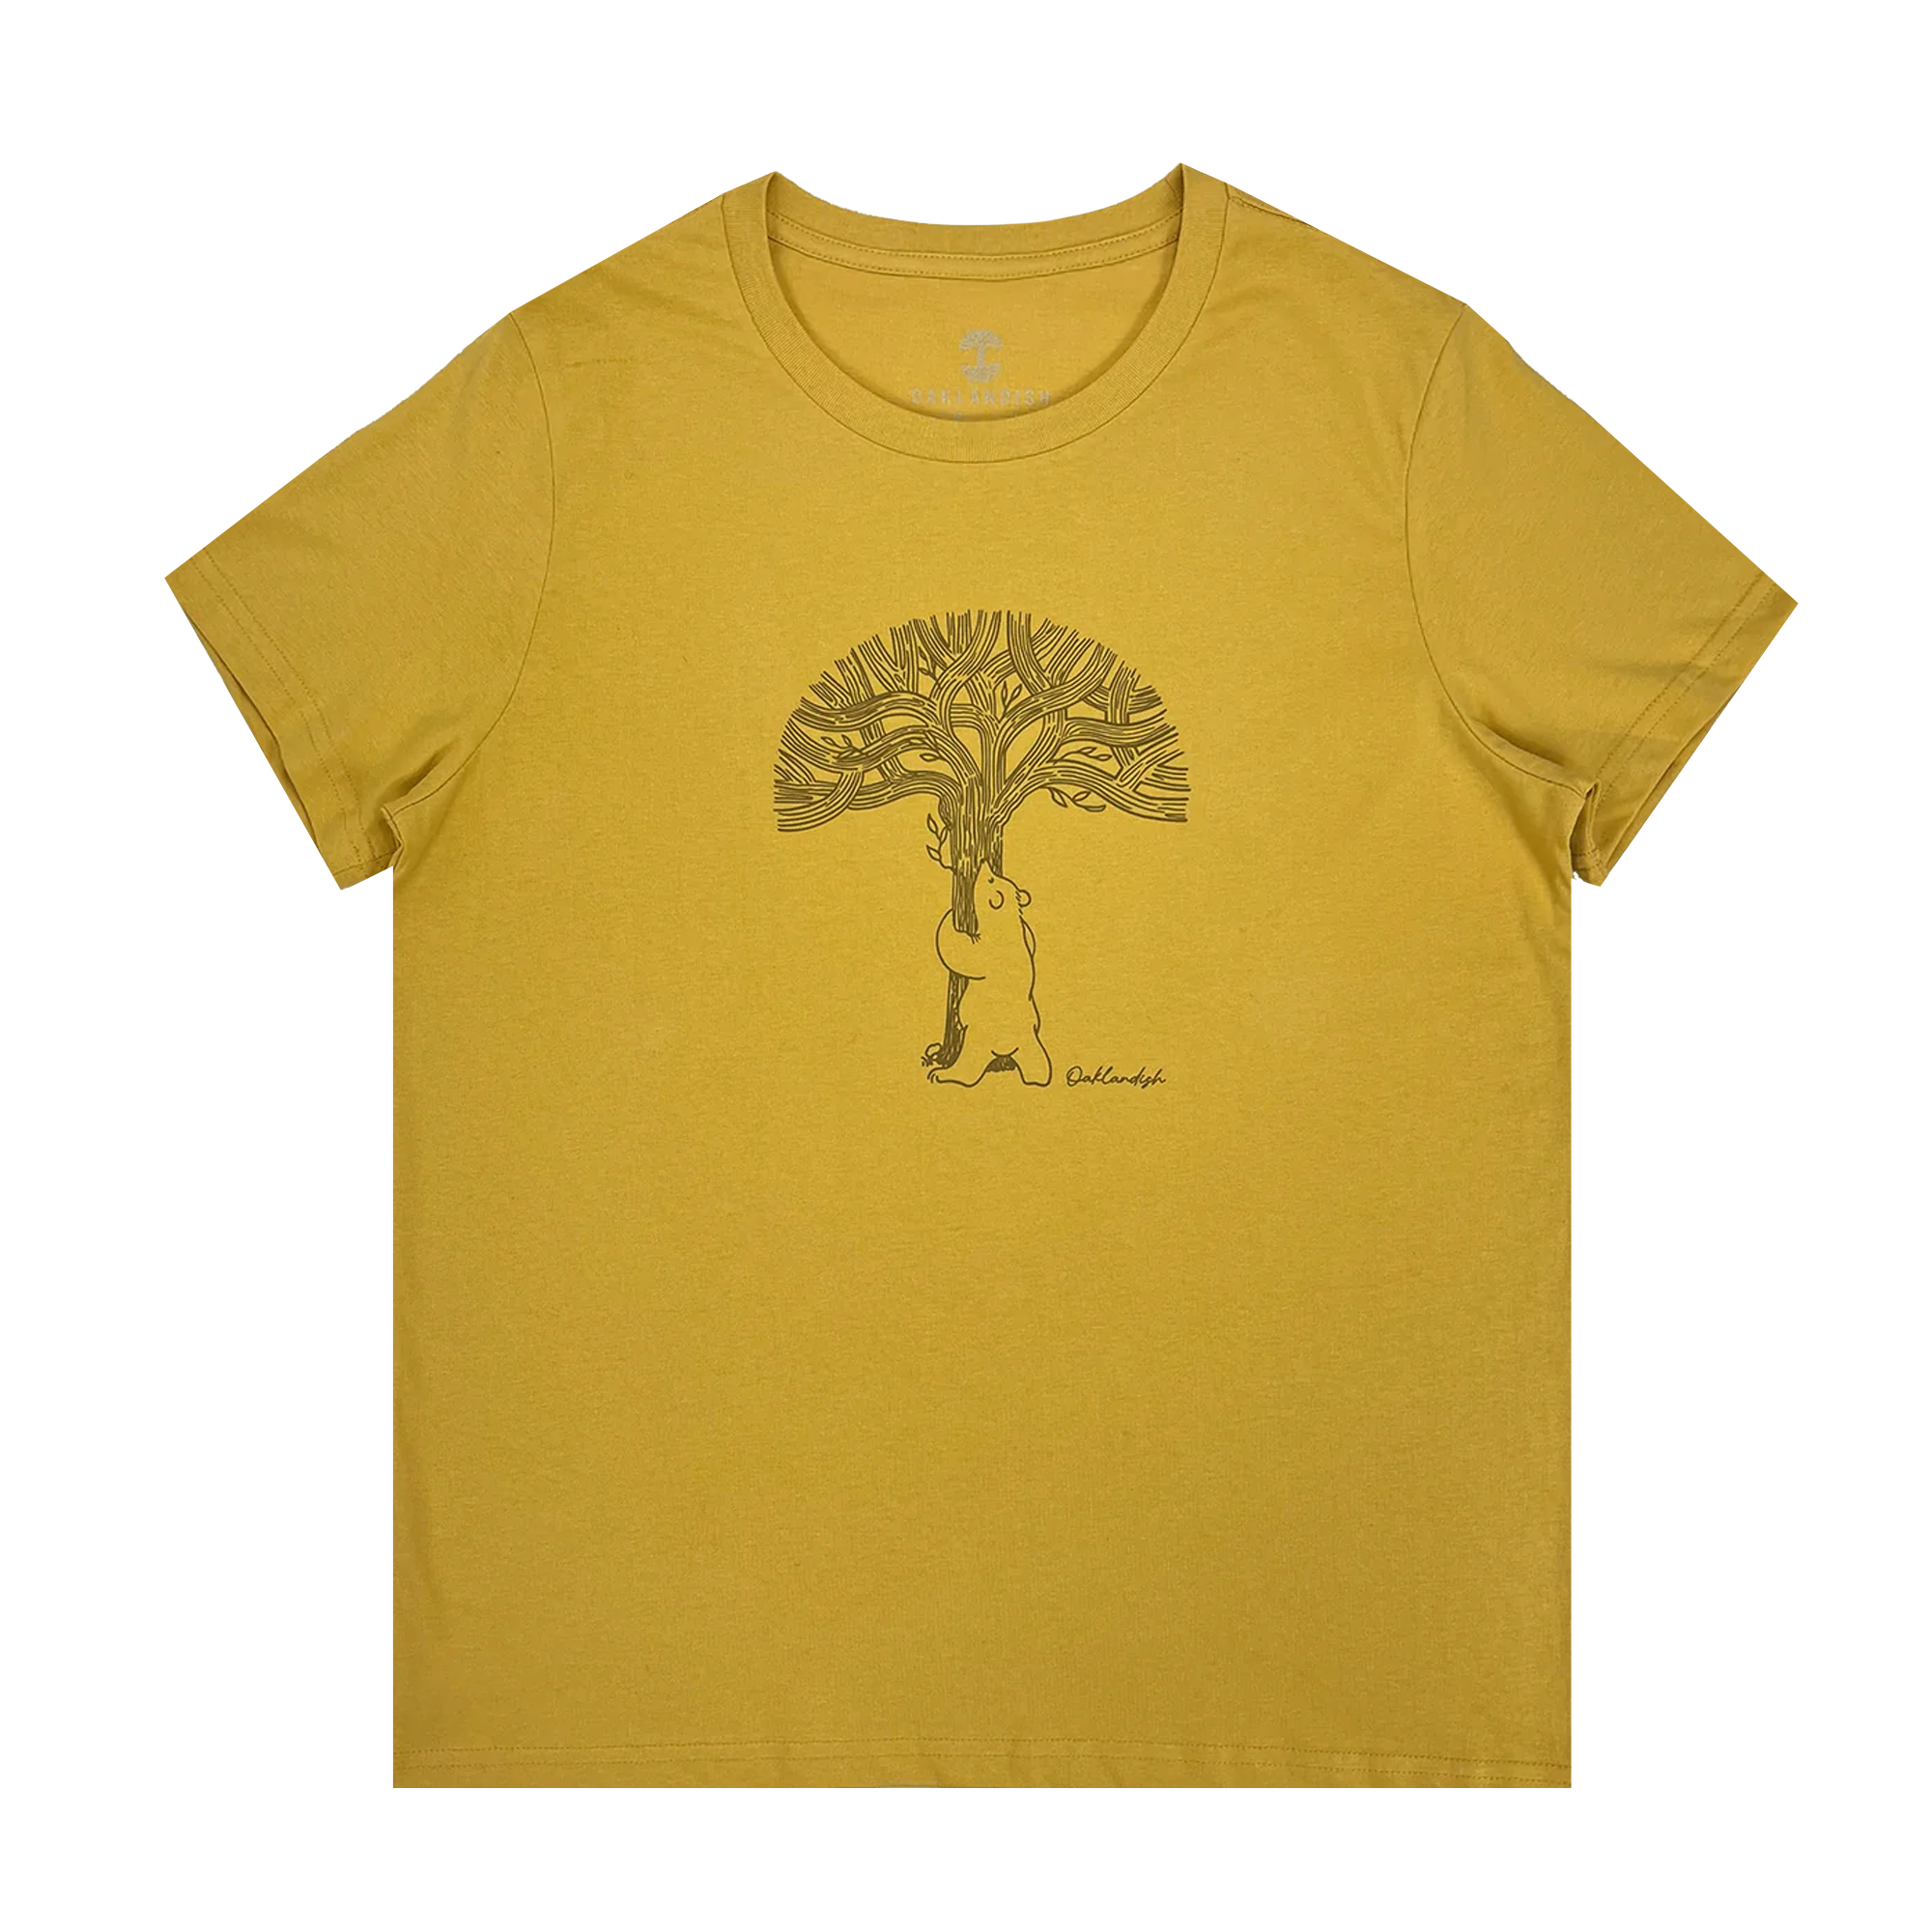 Women’s cut mustard yellow t-shirt with line graphic of a bear hugging a tree representing Oaklandish.